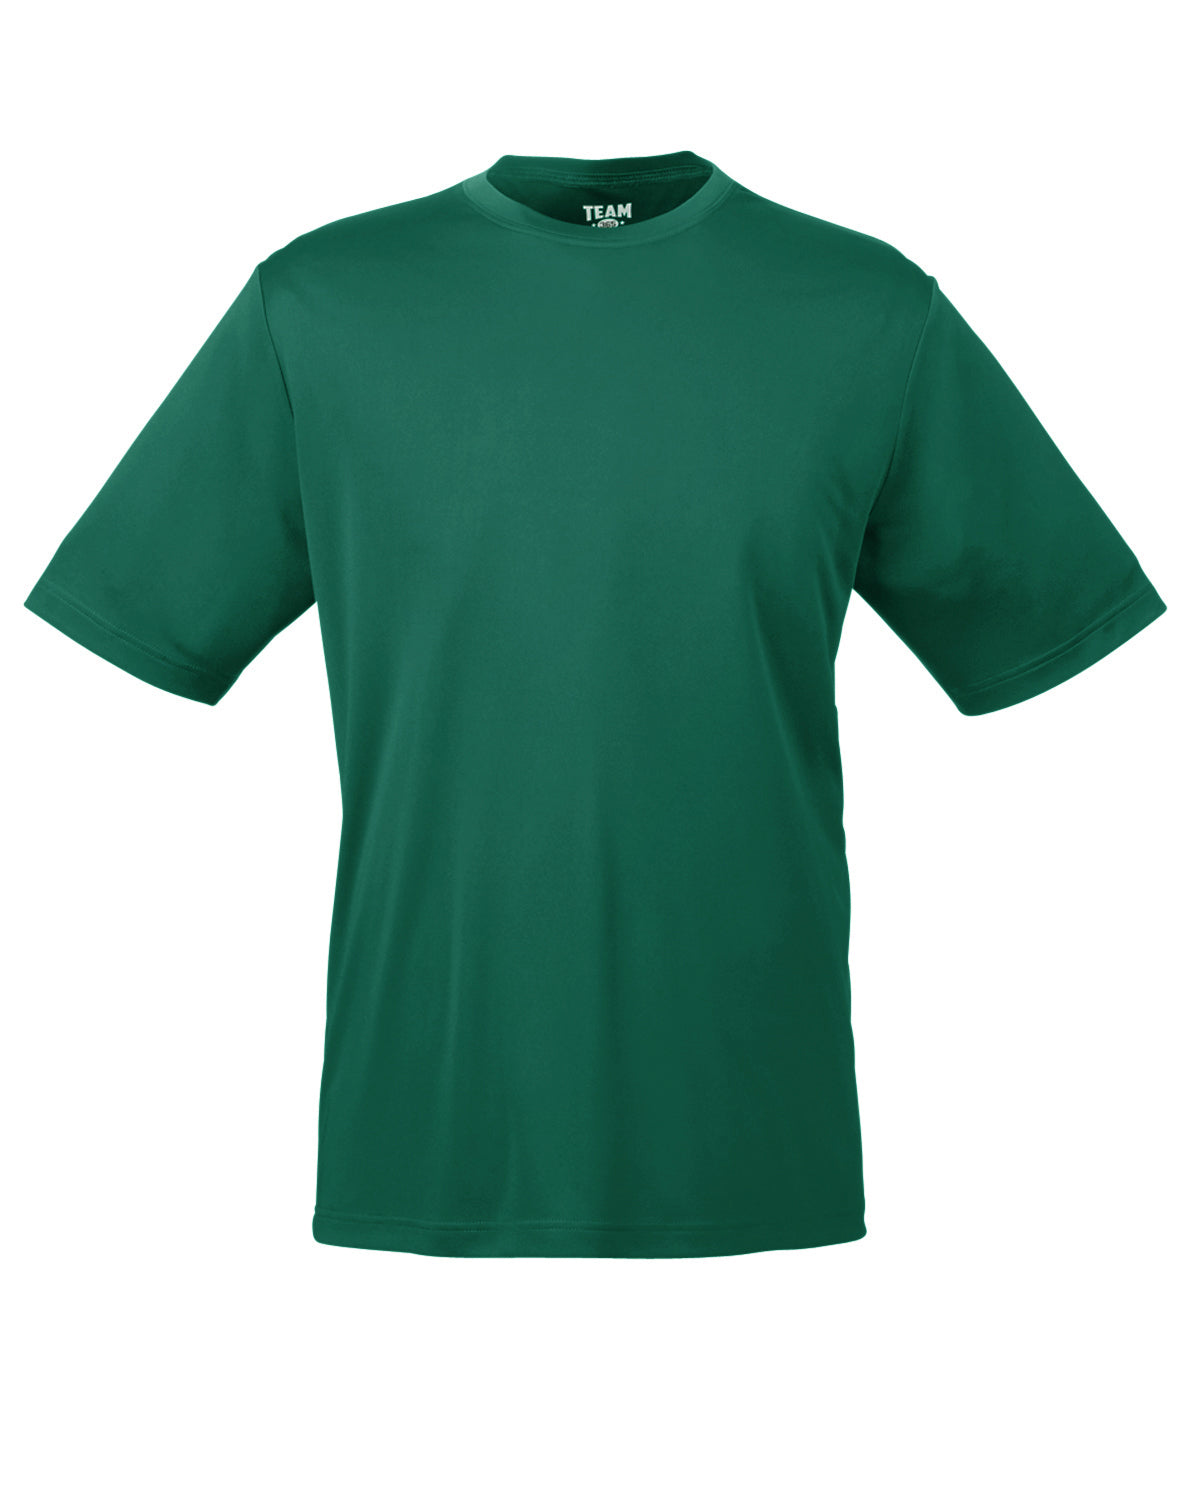 Front of green dry-wick short sleeve shirt.